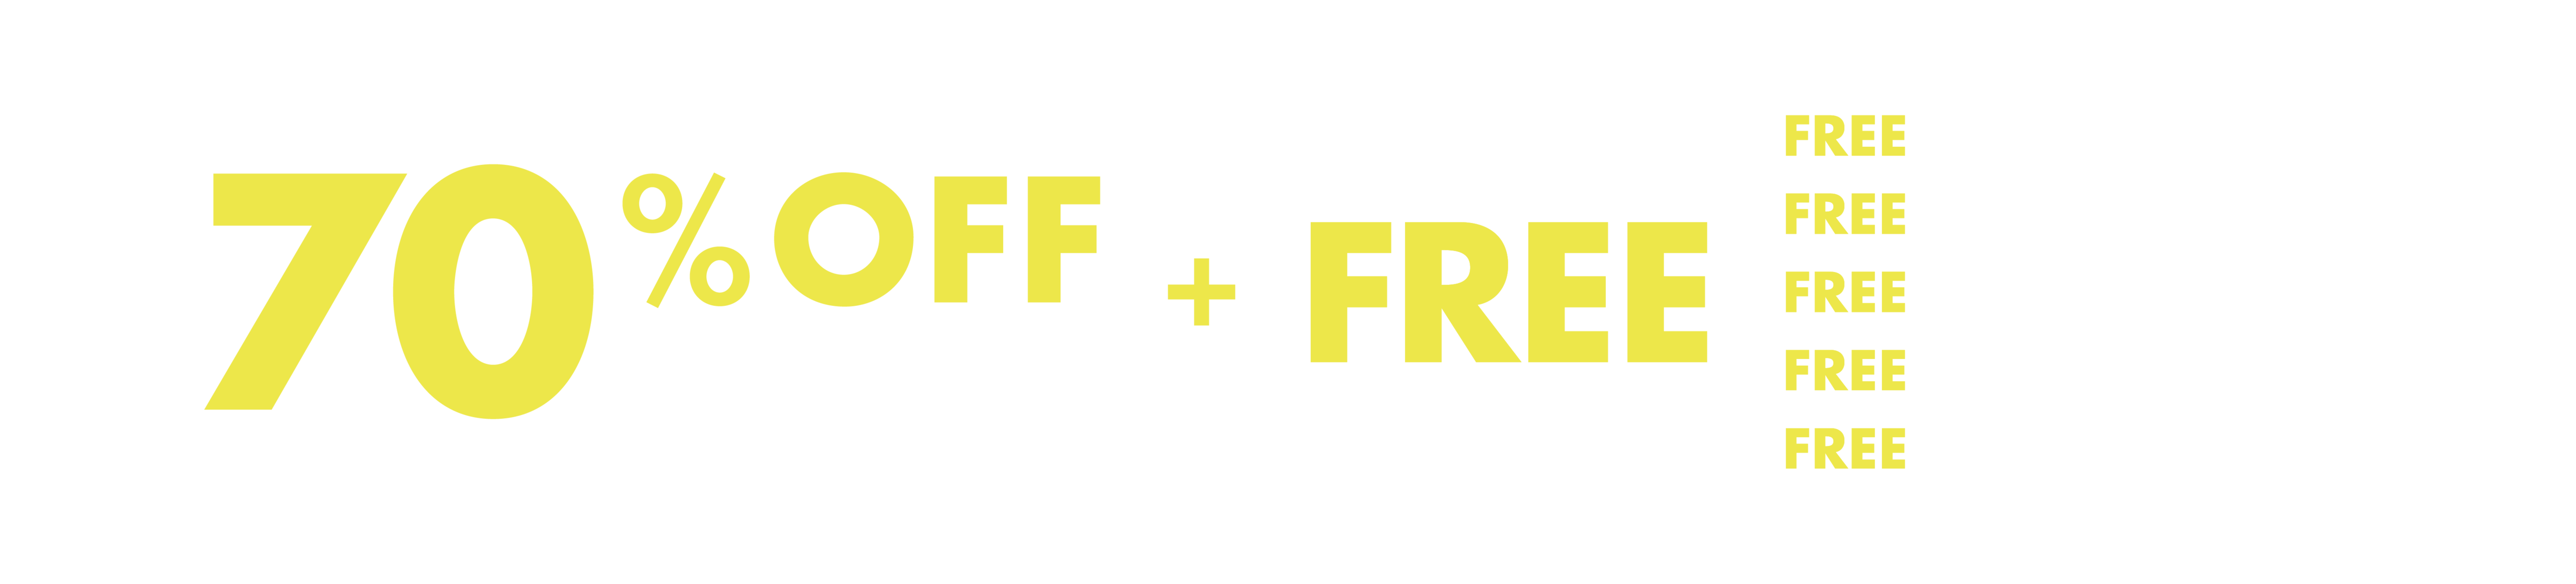 35% Off + Take All Free Offers